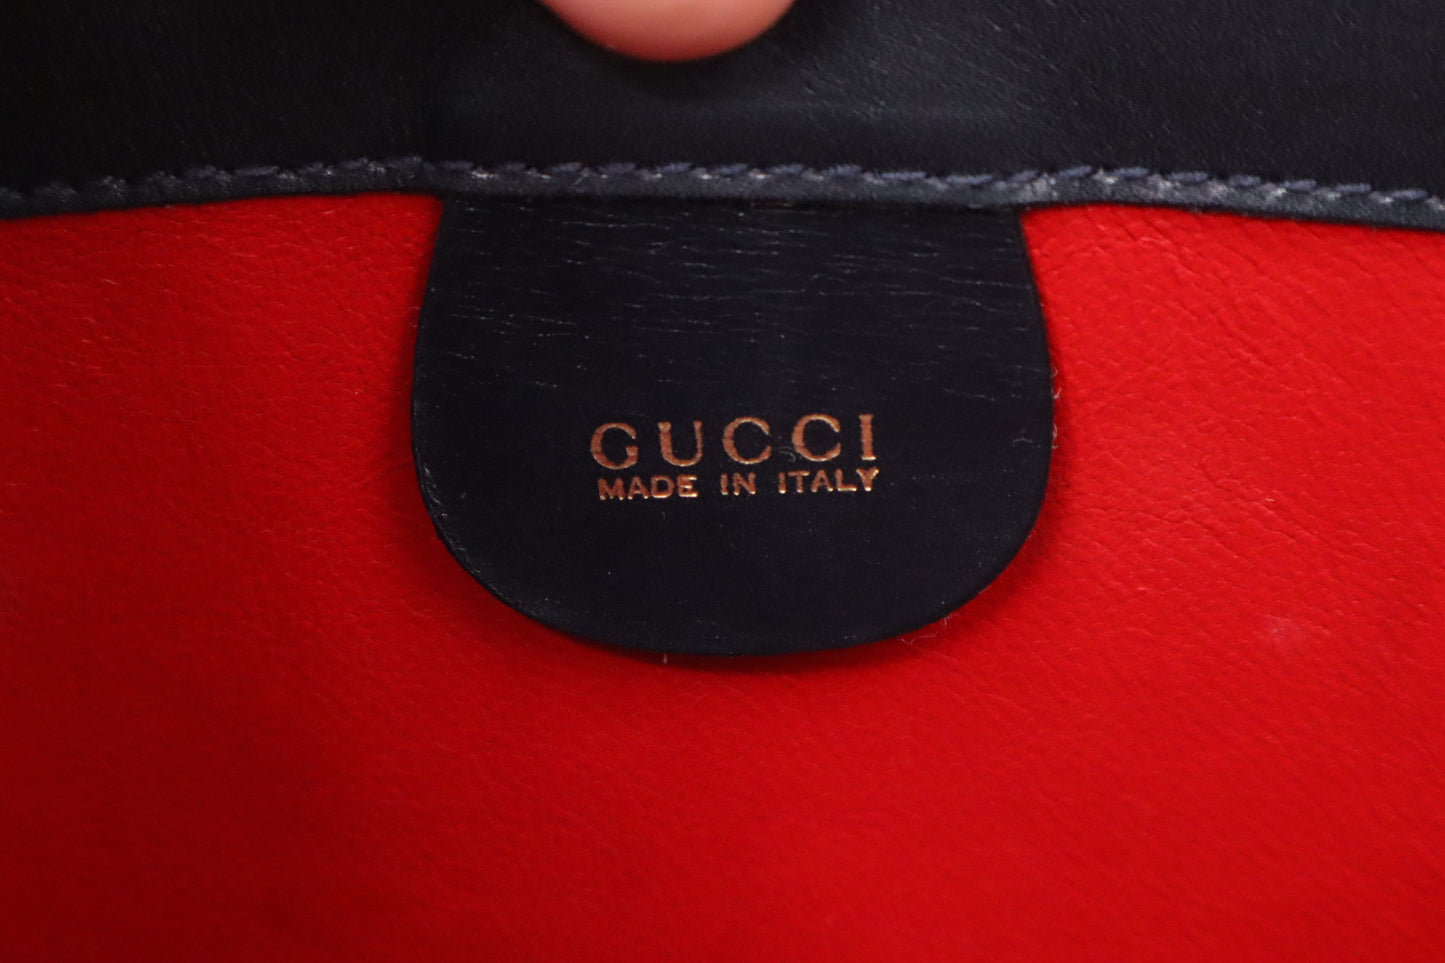 Gucci Bamboo Handbag in Navy Blue Leather